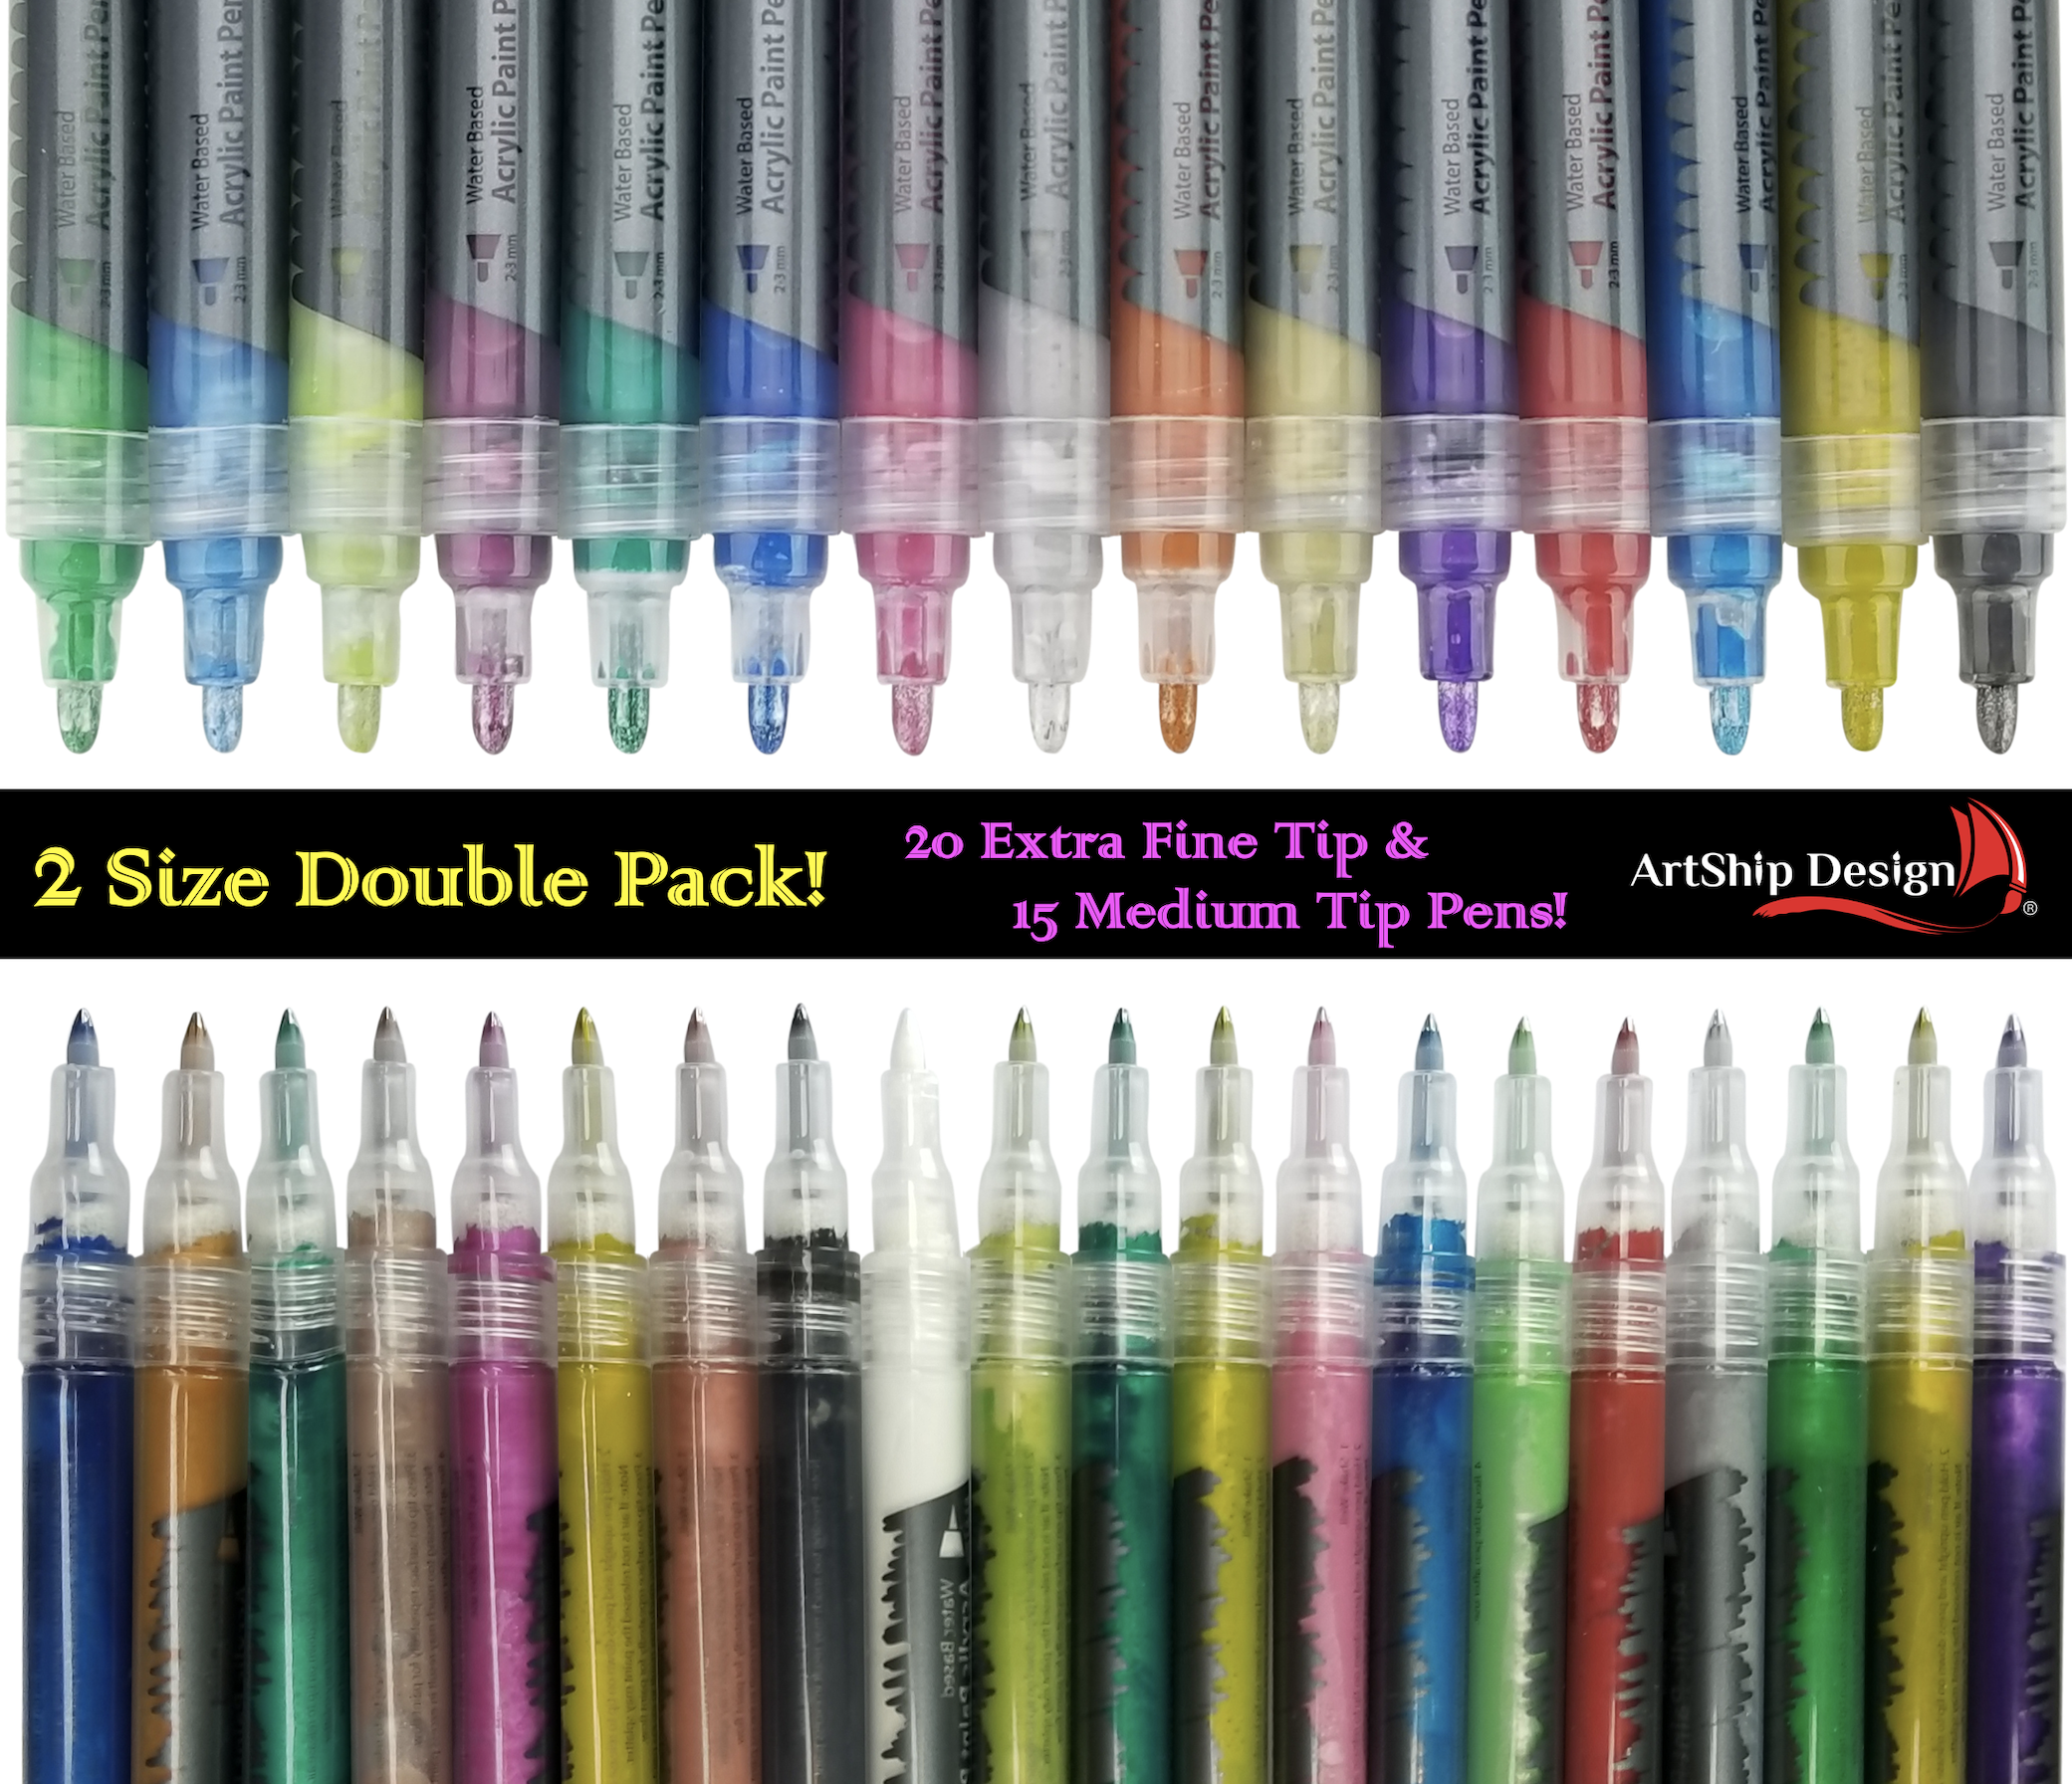 NICETY 42 Colors Dual Tip Acrylic Paint Pens, Acrylic Paint Pens Paint  Markers w